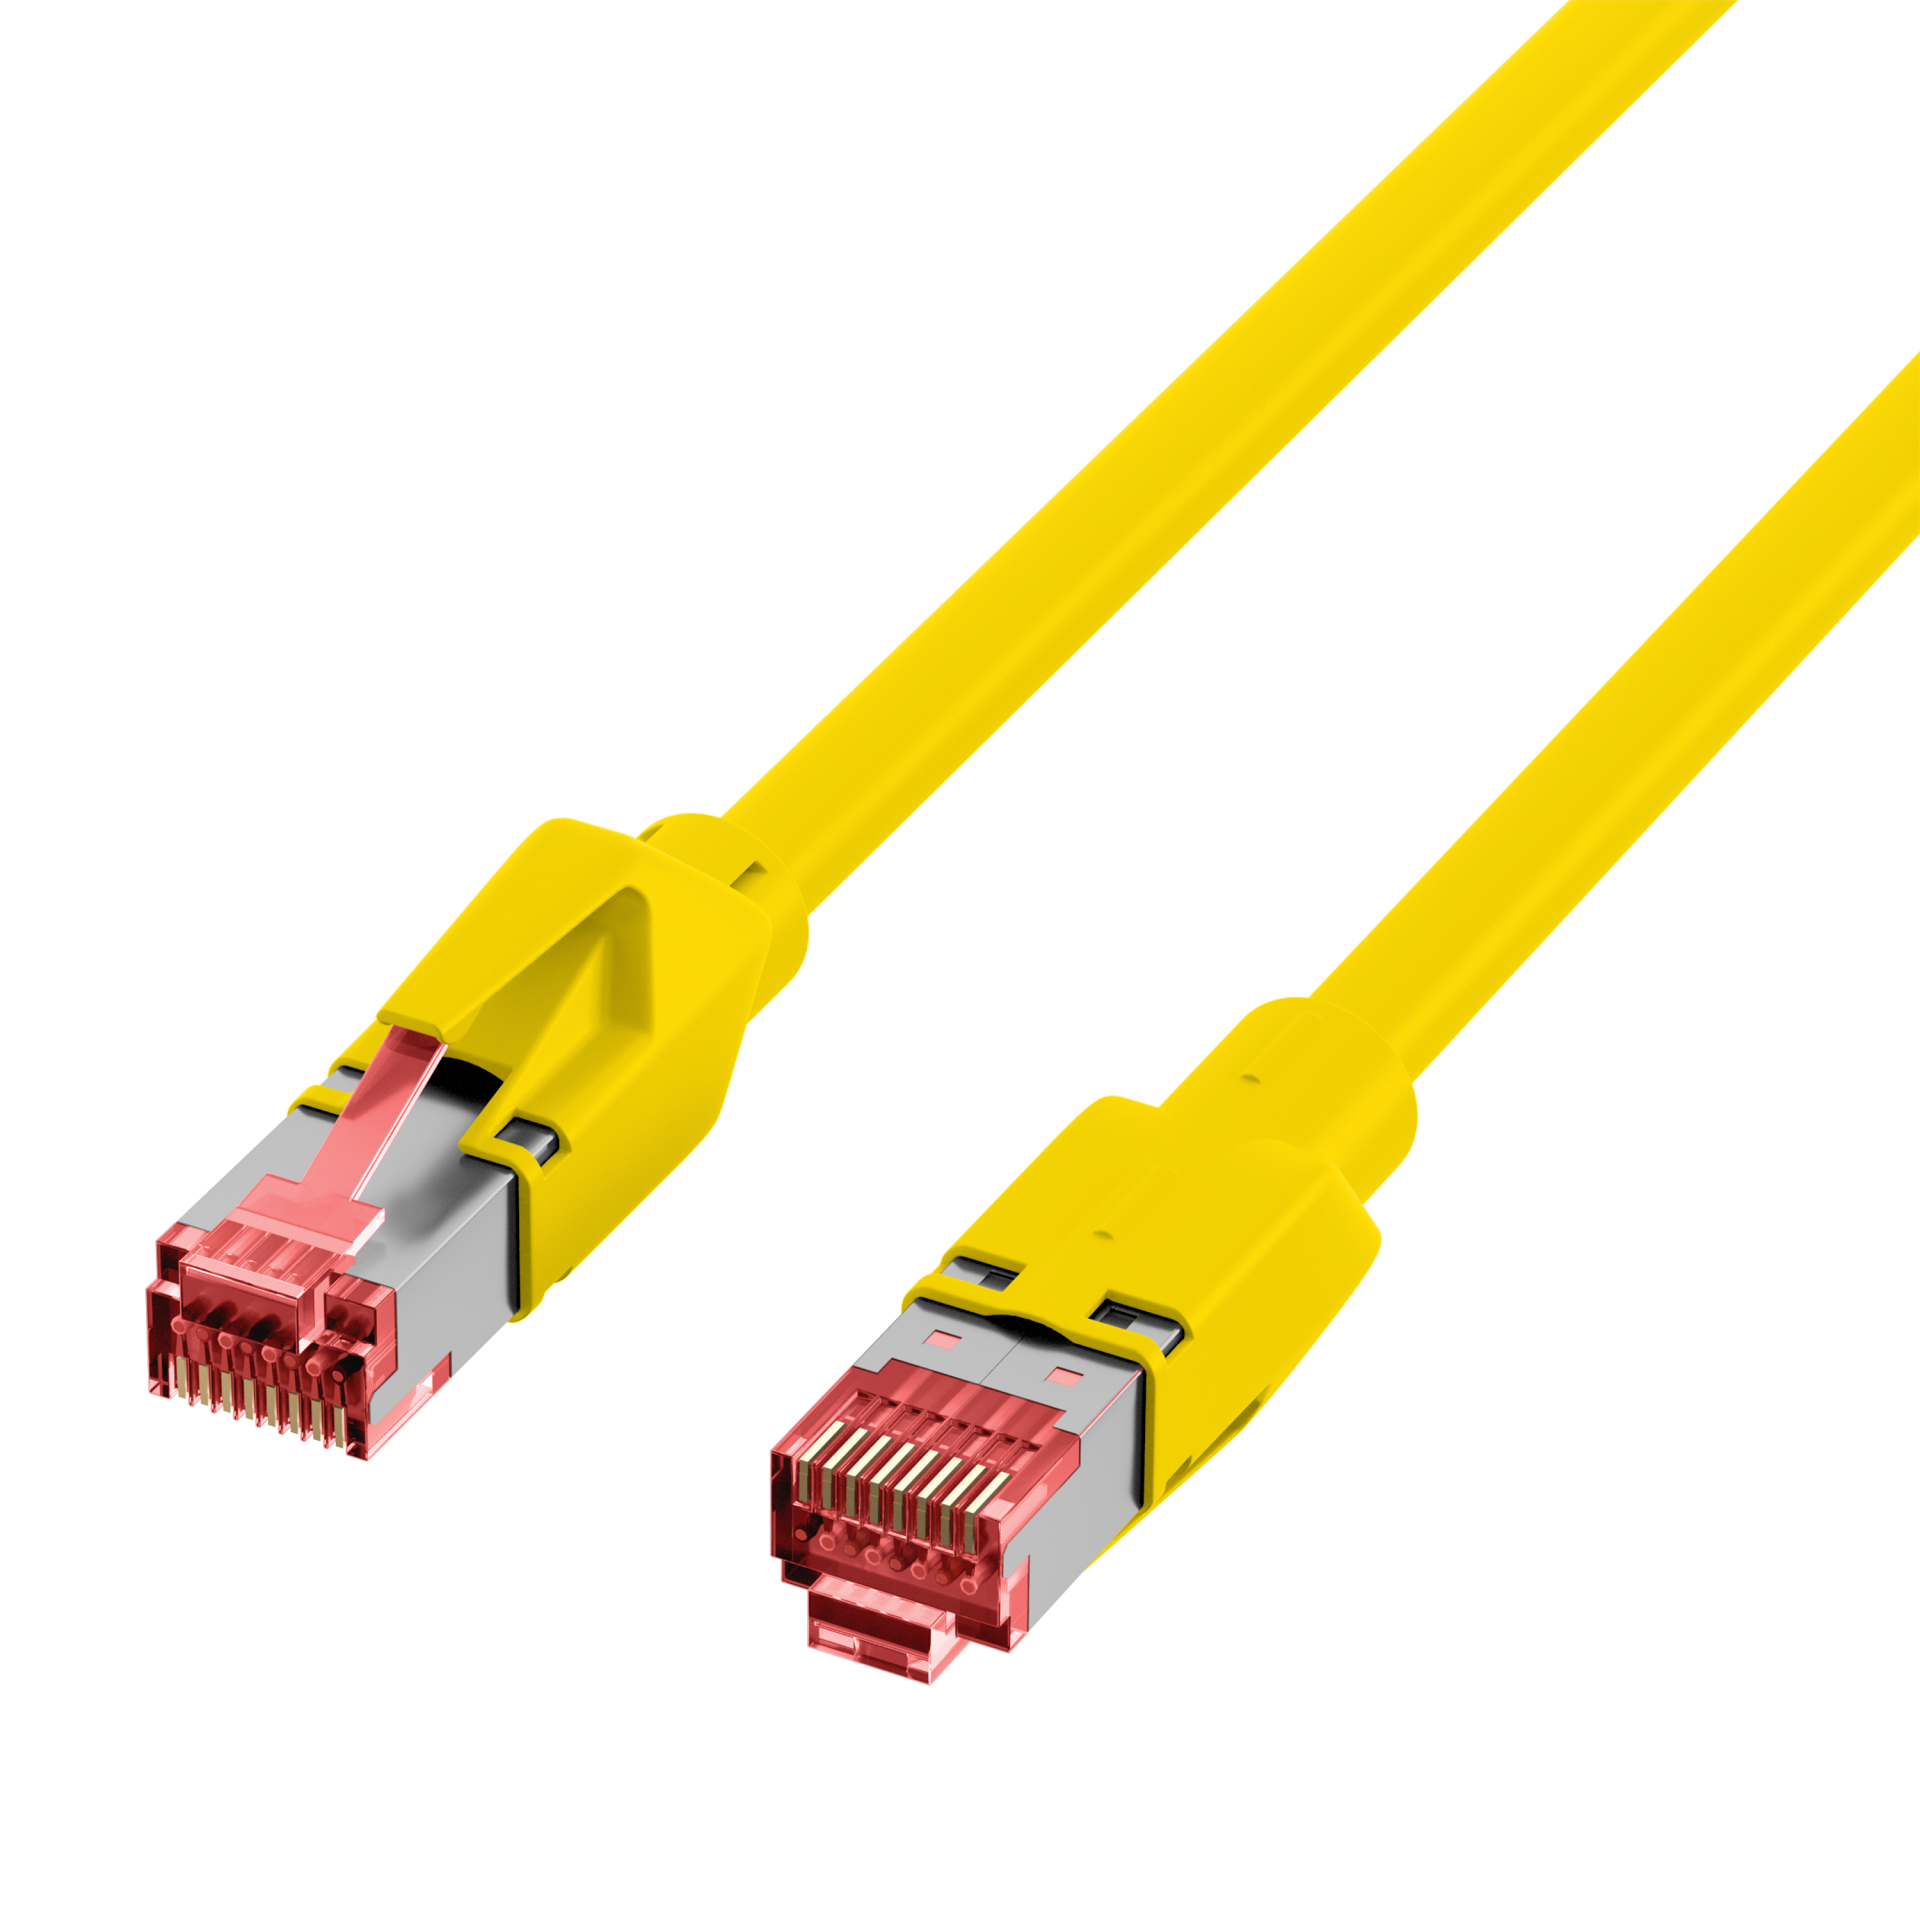 RJ45 Patch Cord Cat.5e SF/UTP PURTM21 for drag chains yellow 1m